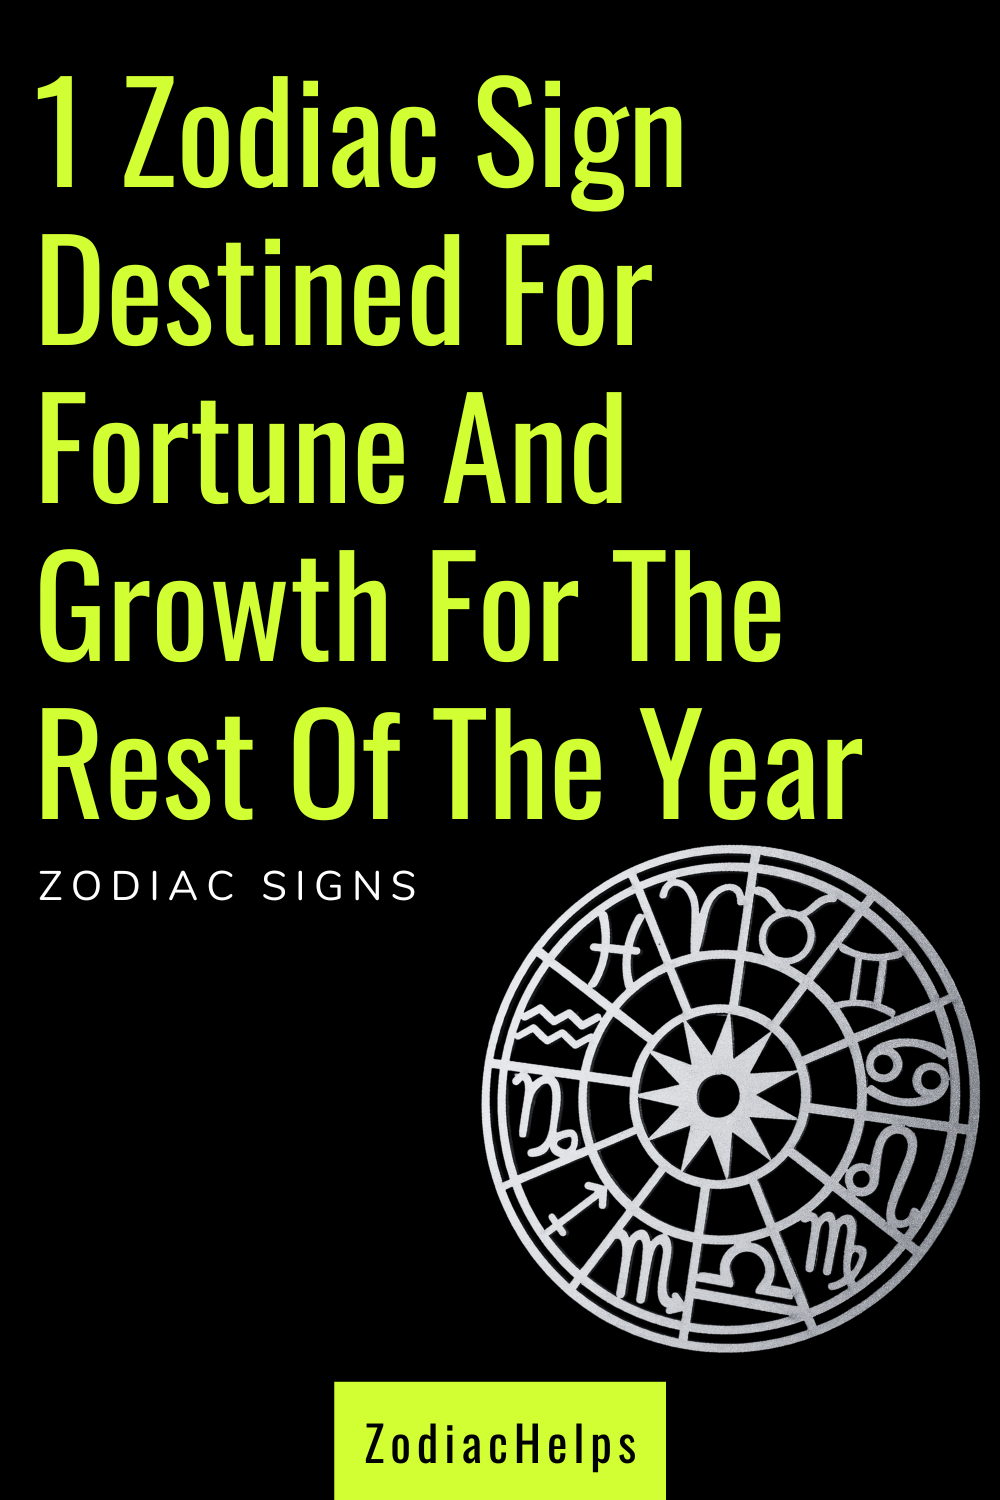 1 Zodiac Sign Destined For Fortune And Growth For The Rest Of The Year